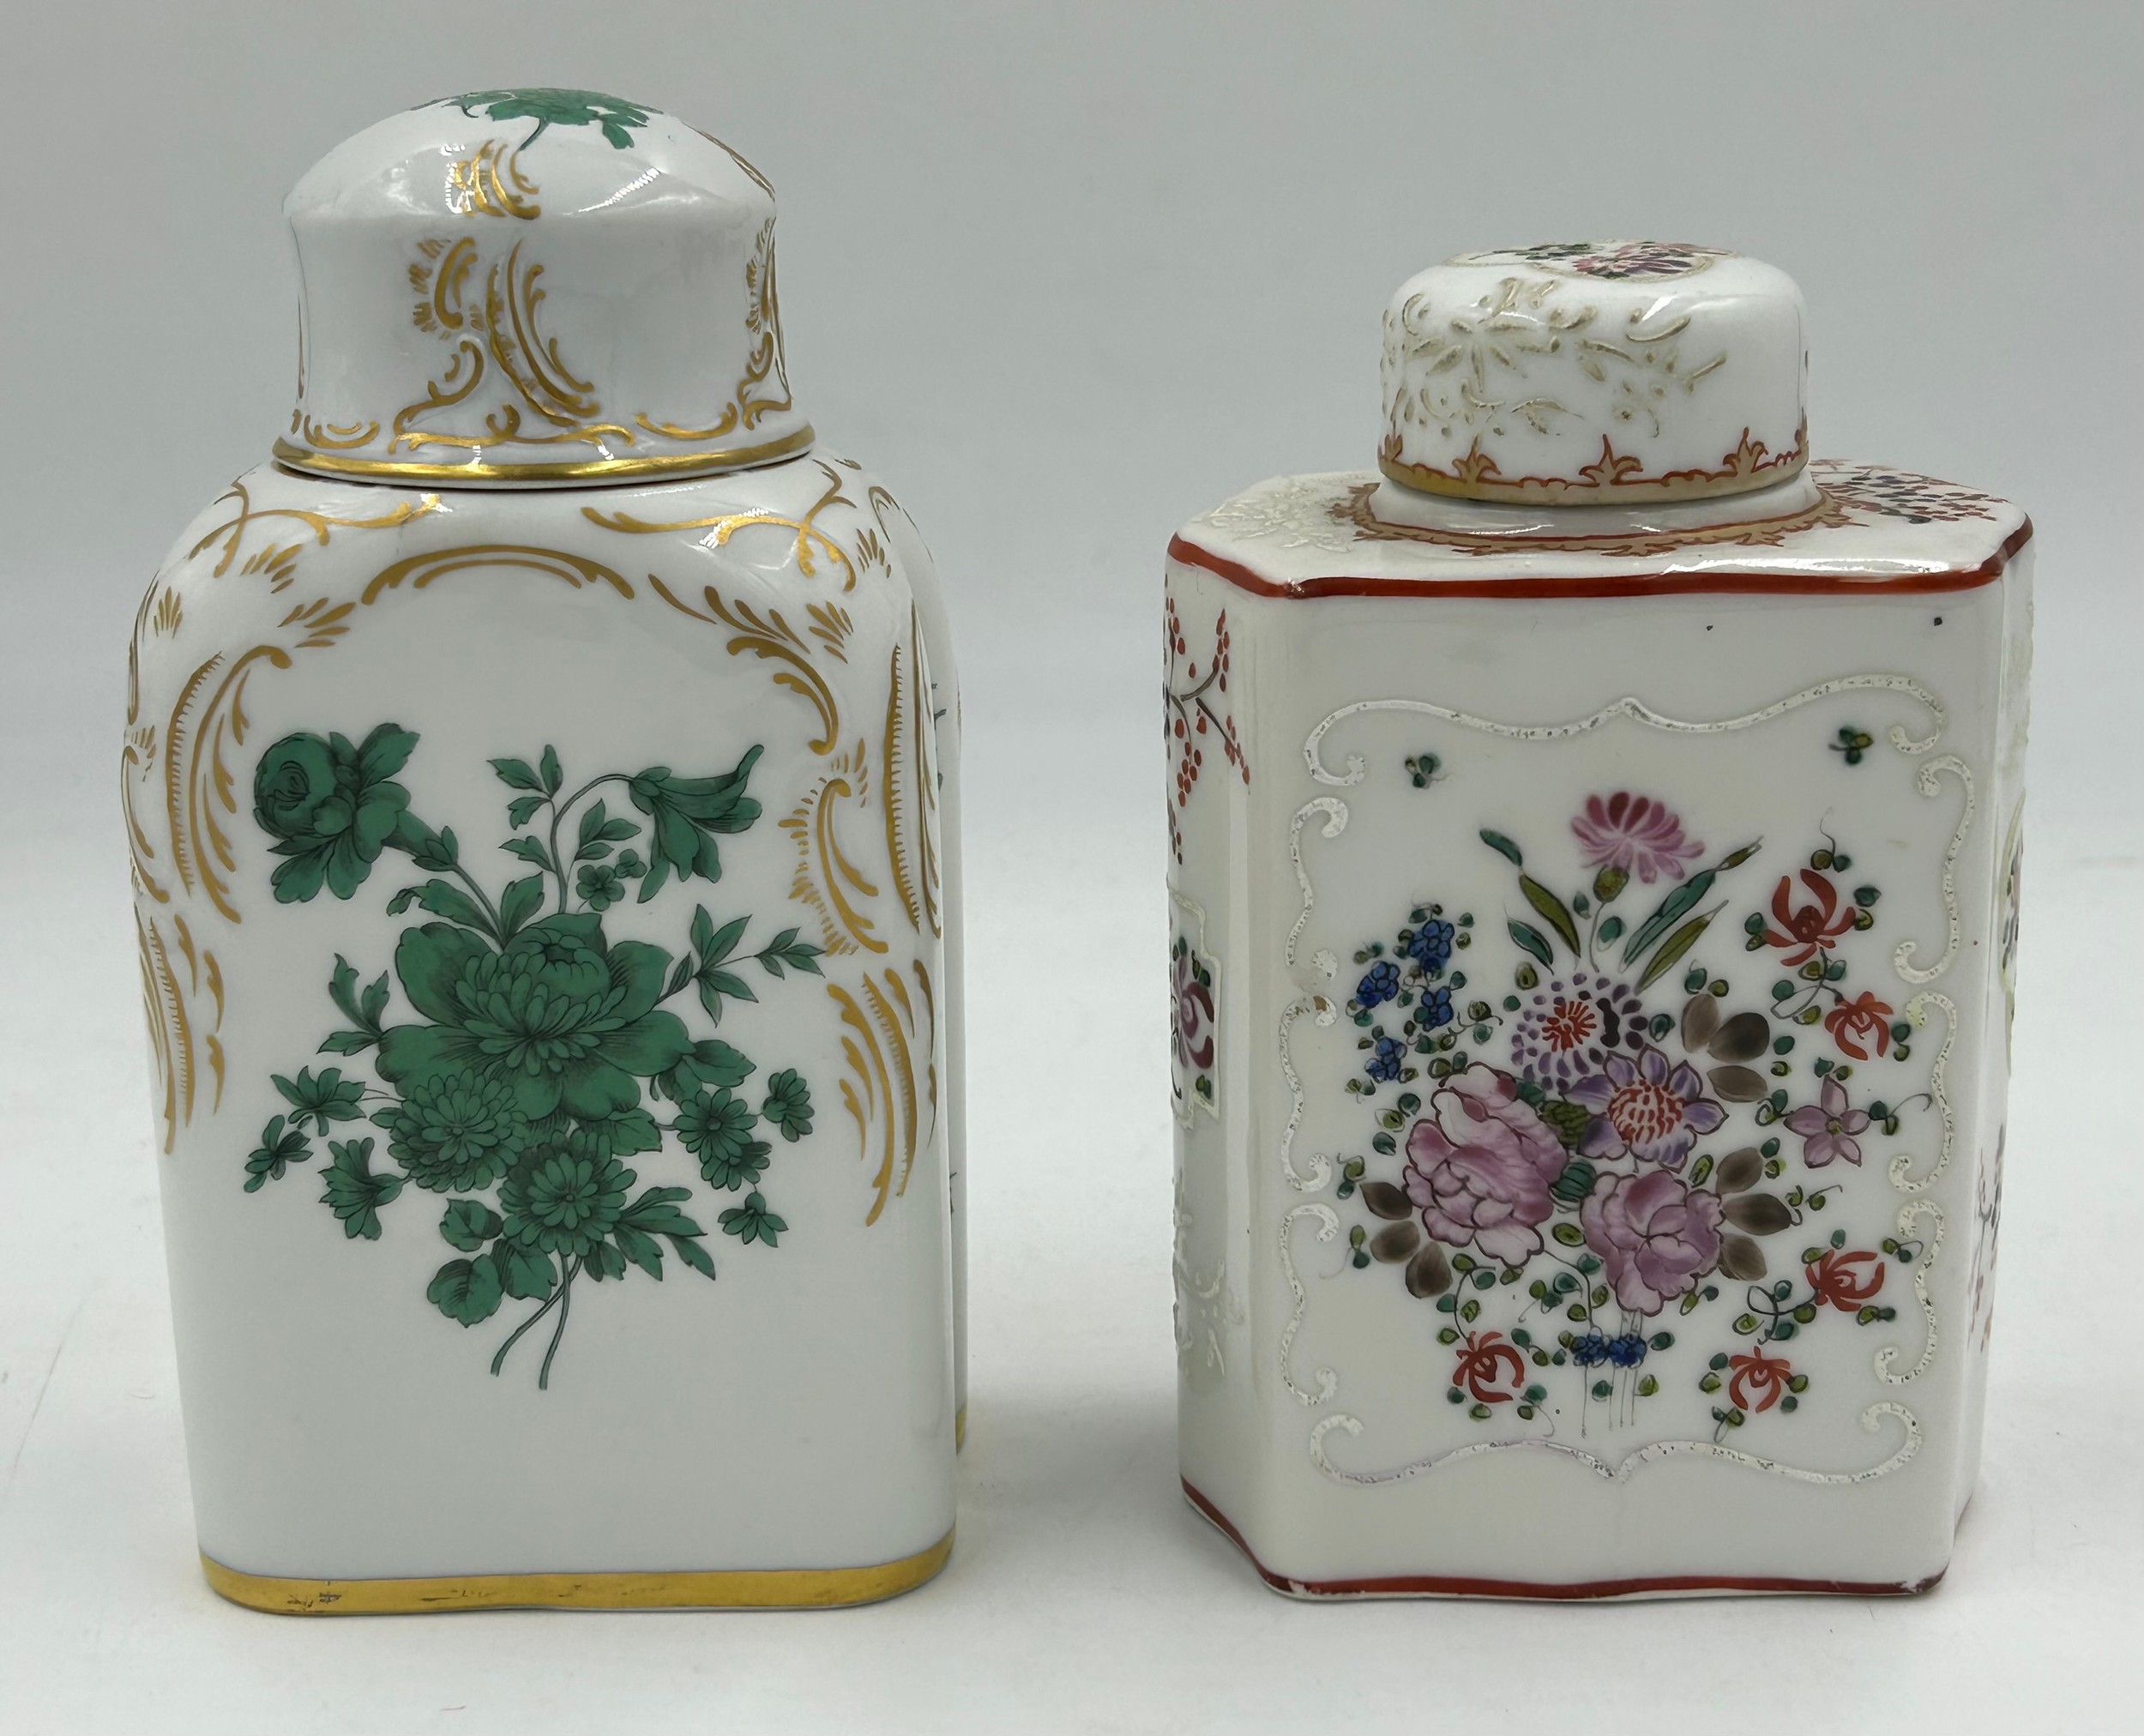 Two 19th century Porcelain Tea Caddies by Samson of Paris, one with armorial crest, one with - Image 2 of 5